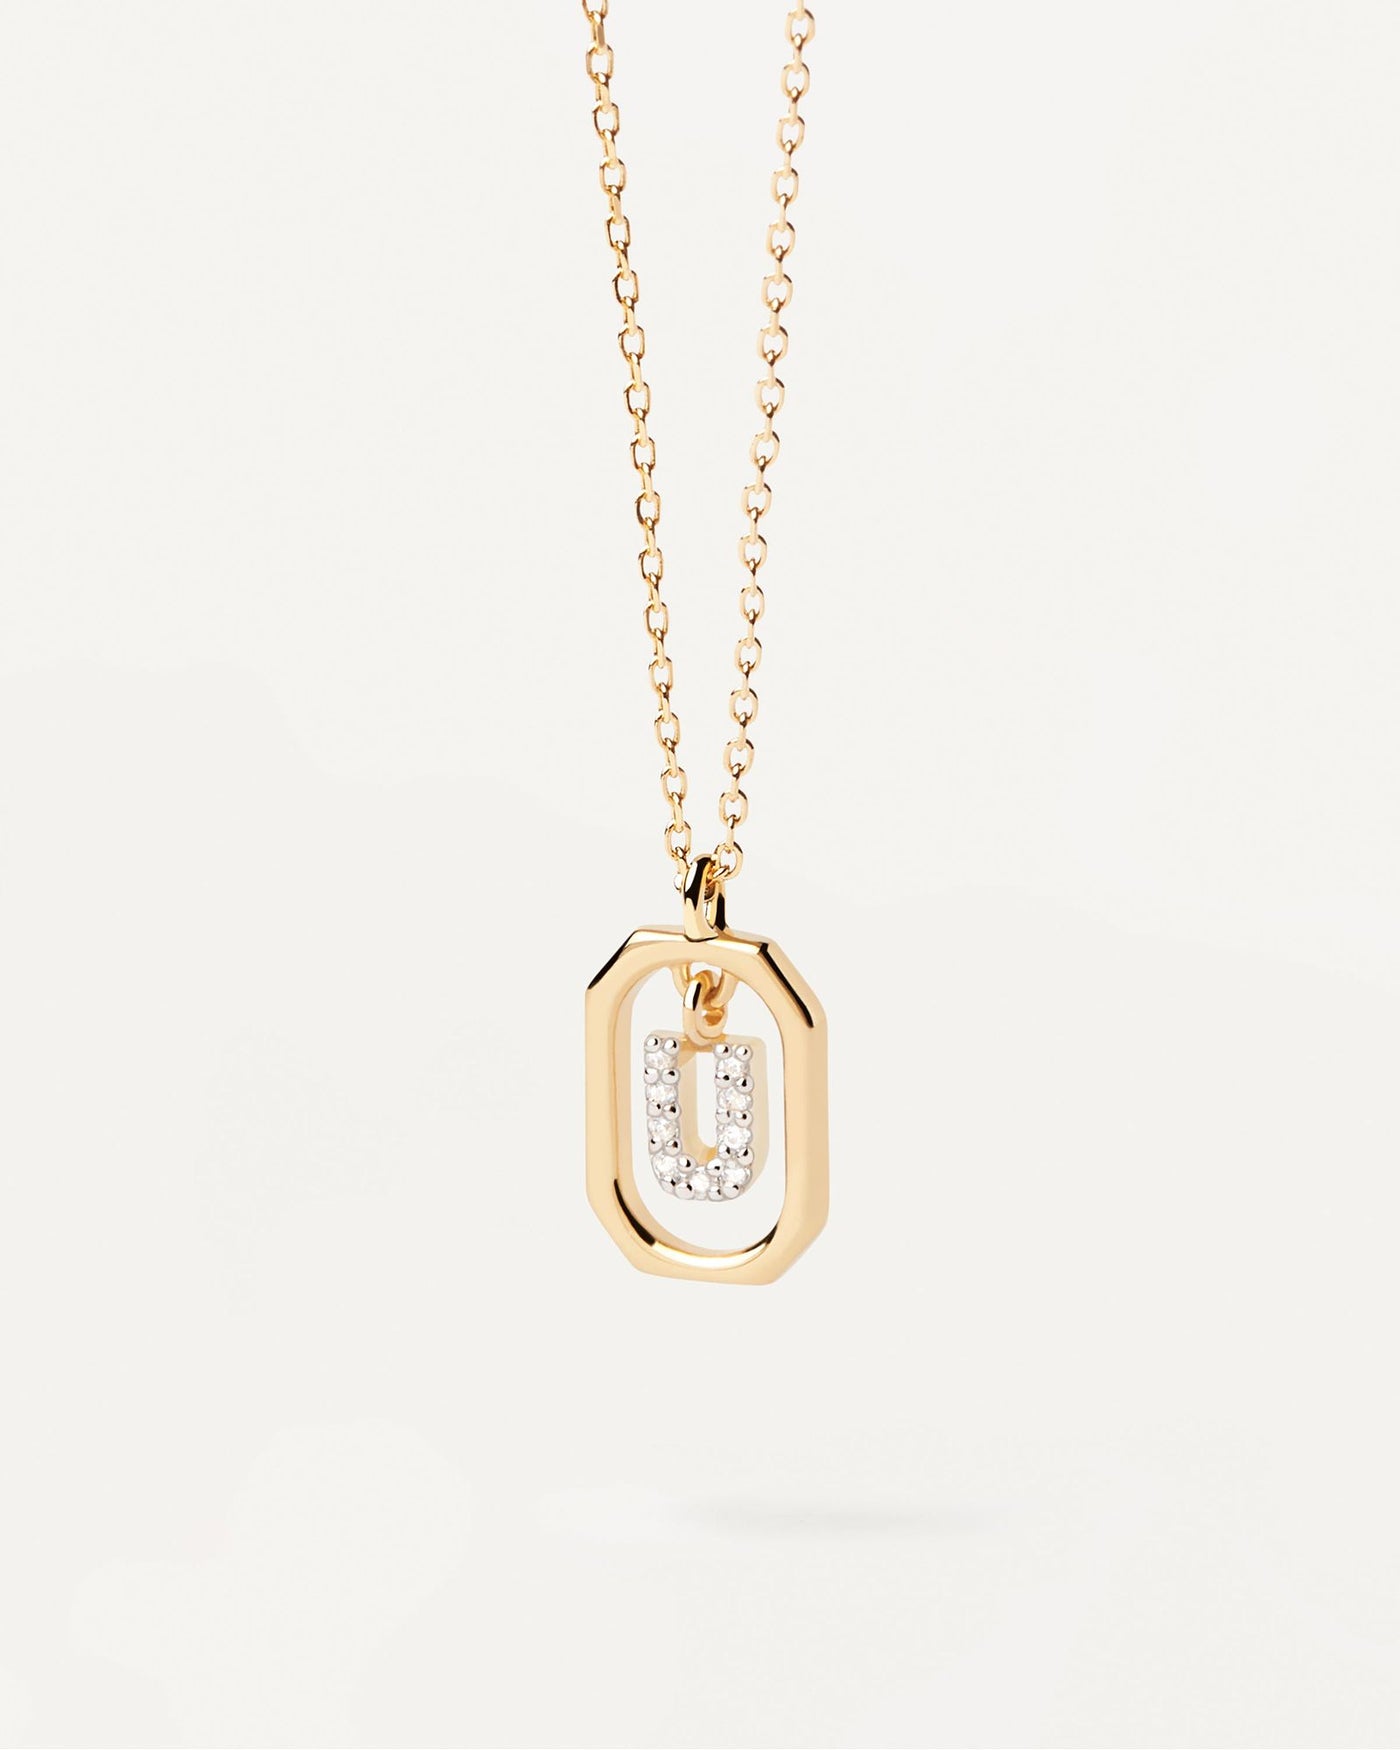 2024 Selection | Mini Letter U Necklace. Small initial U necklace in zirconia inside gold-plated silver octagonal pendant. Get the latest arrival from PDPAOLA. Place your order safely and get this Best Seller. Free Shipping.